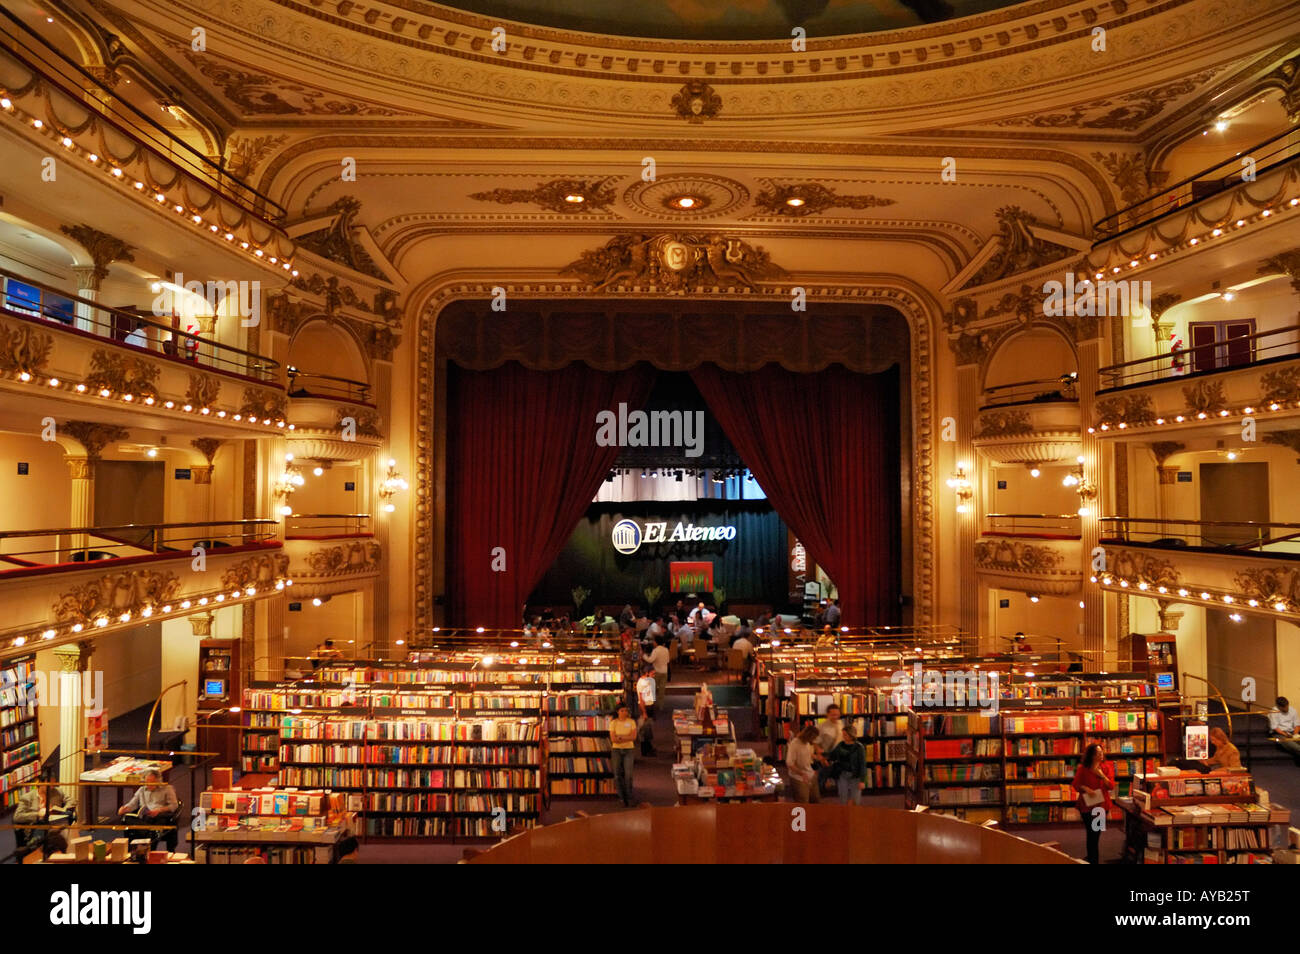 Libreria El Ateneo Yenny High Resolution Stock Photography and Images -  Alamy